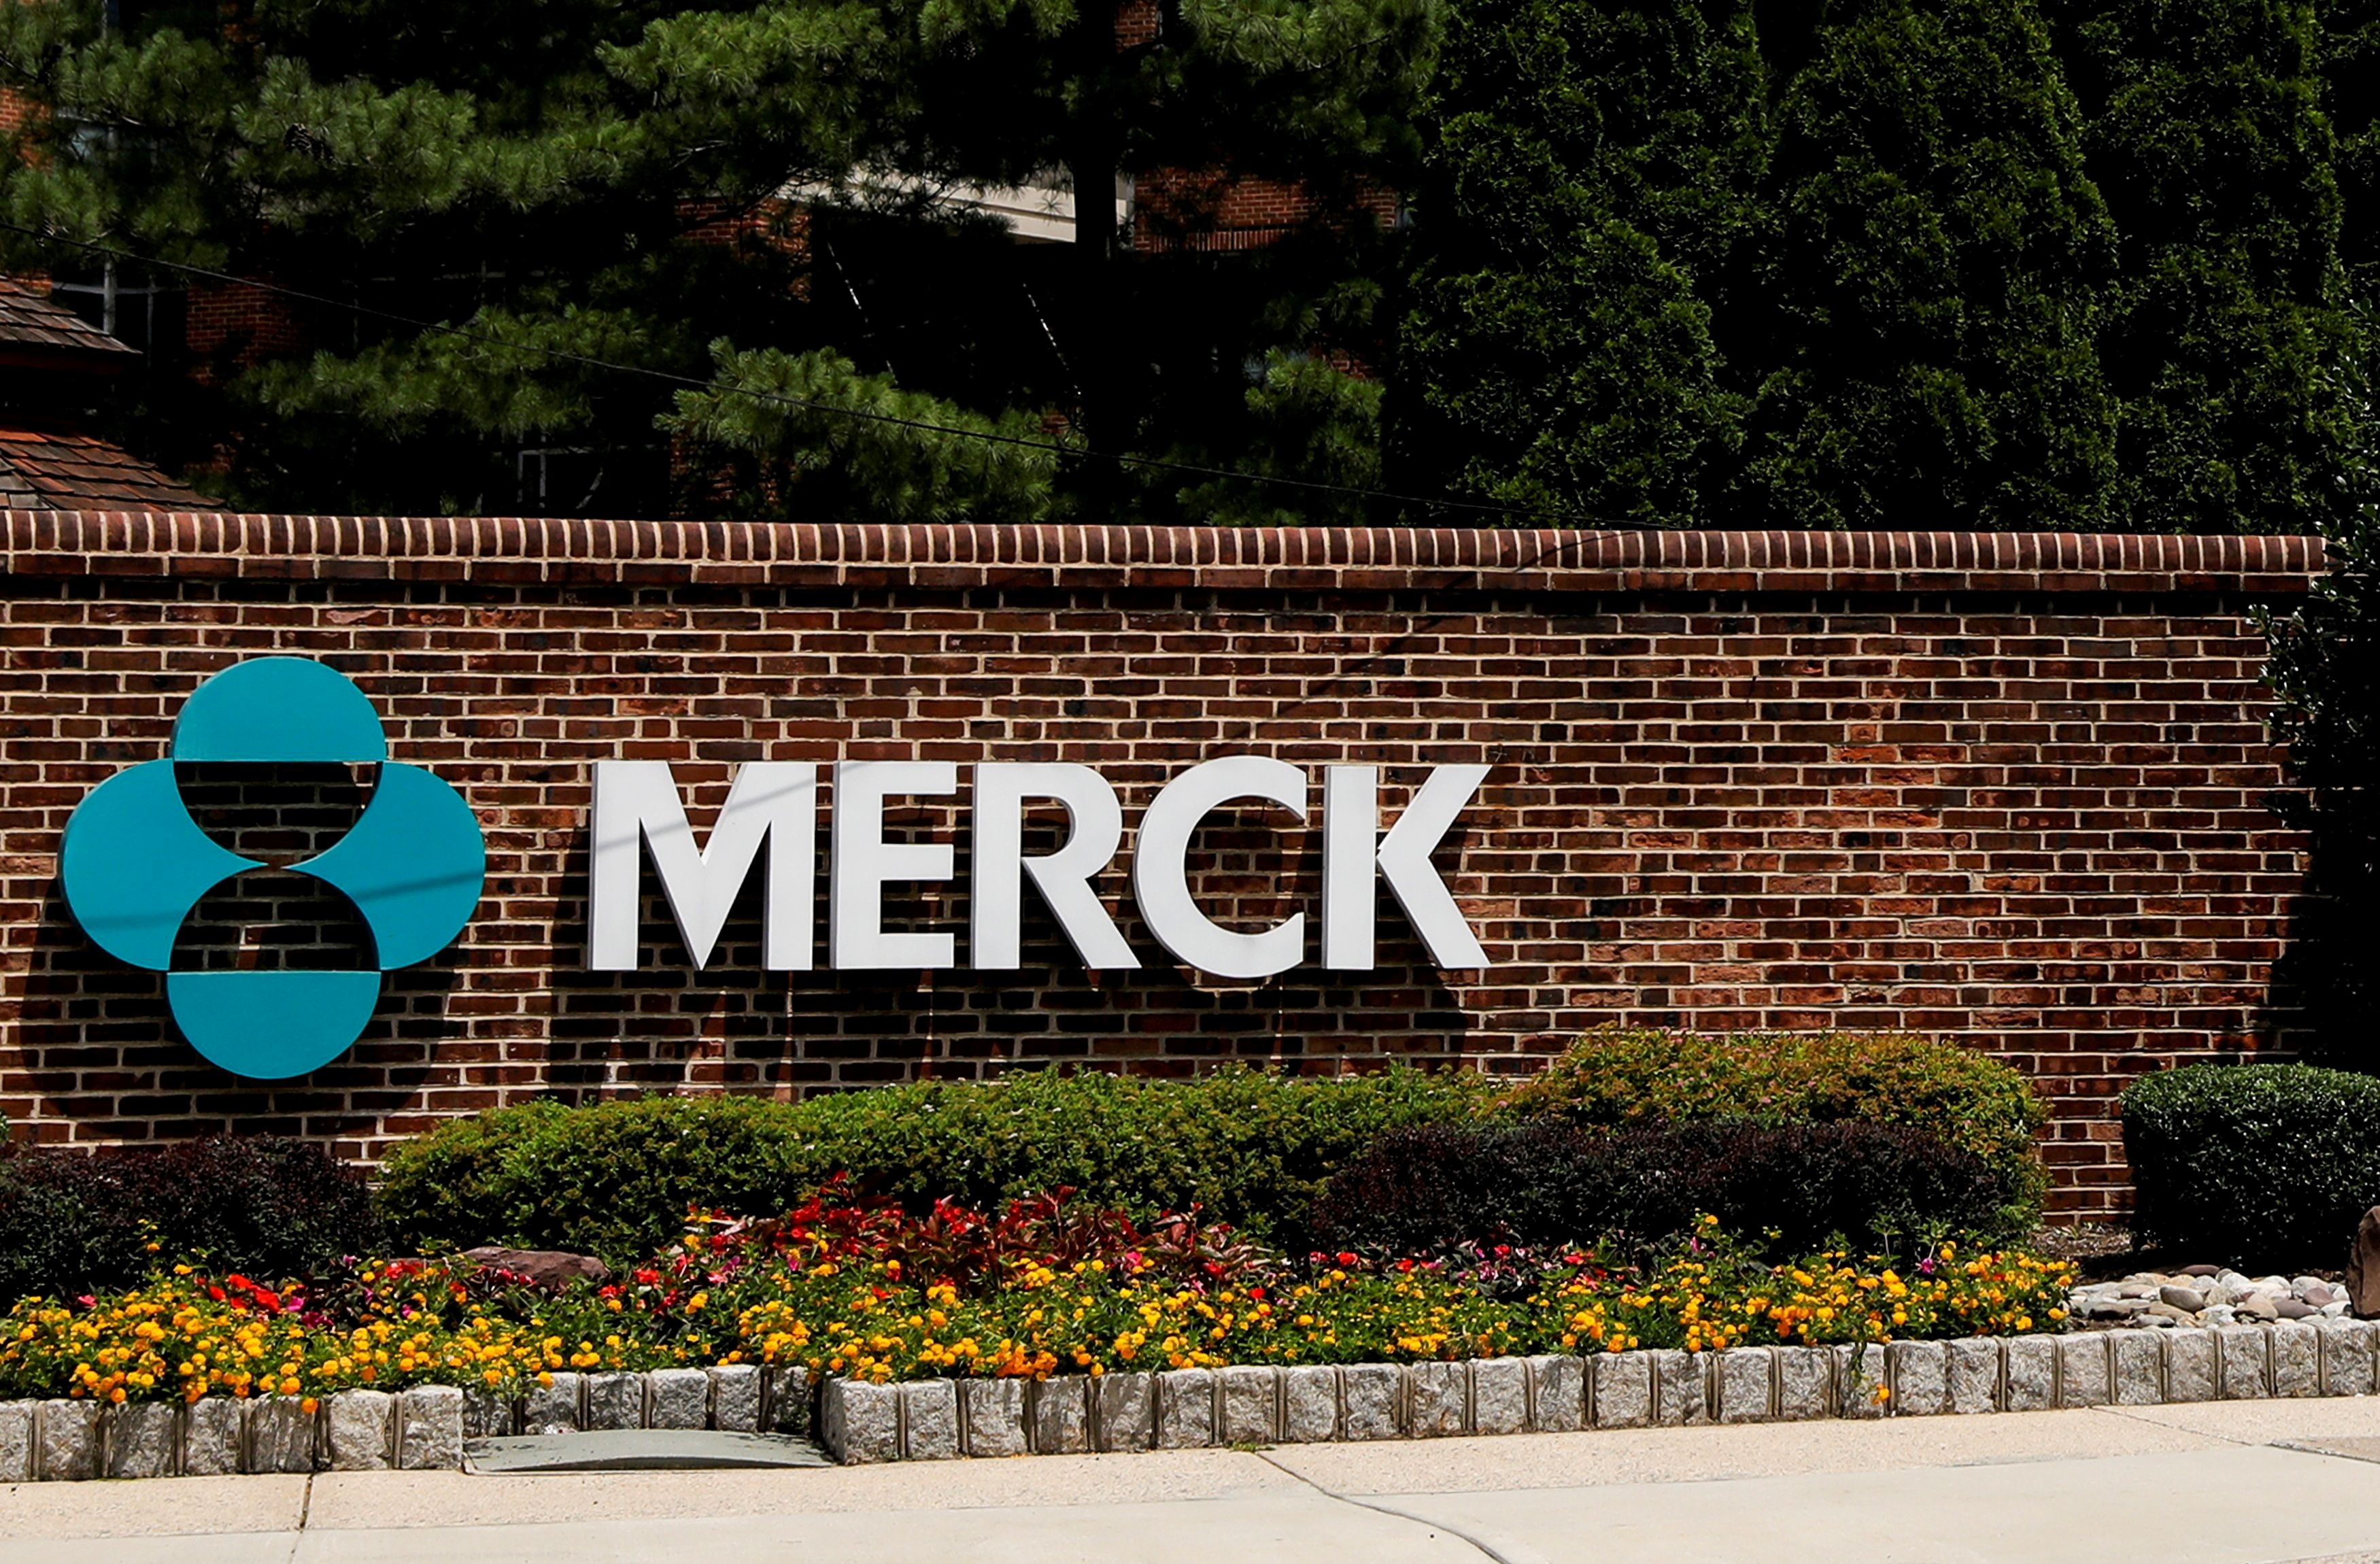 FILE PHOTO: The Merck logo is seen at a gate to the Merck & Co campus in Rahway, New Jersey, U.S., July 12, 2018. REUTERS/Brendan McDermid